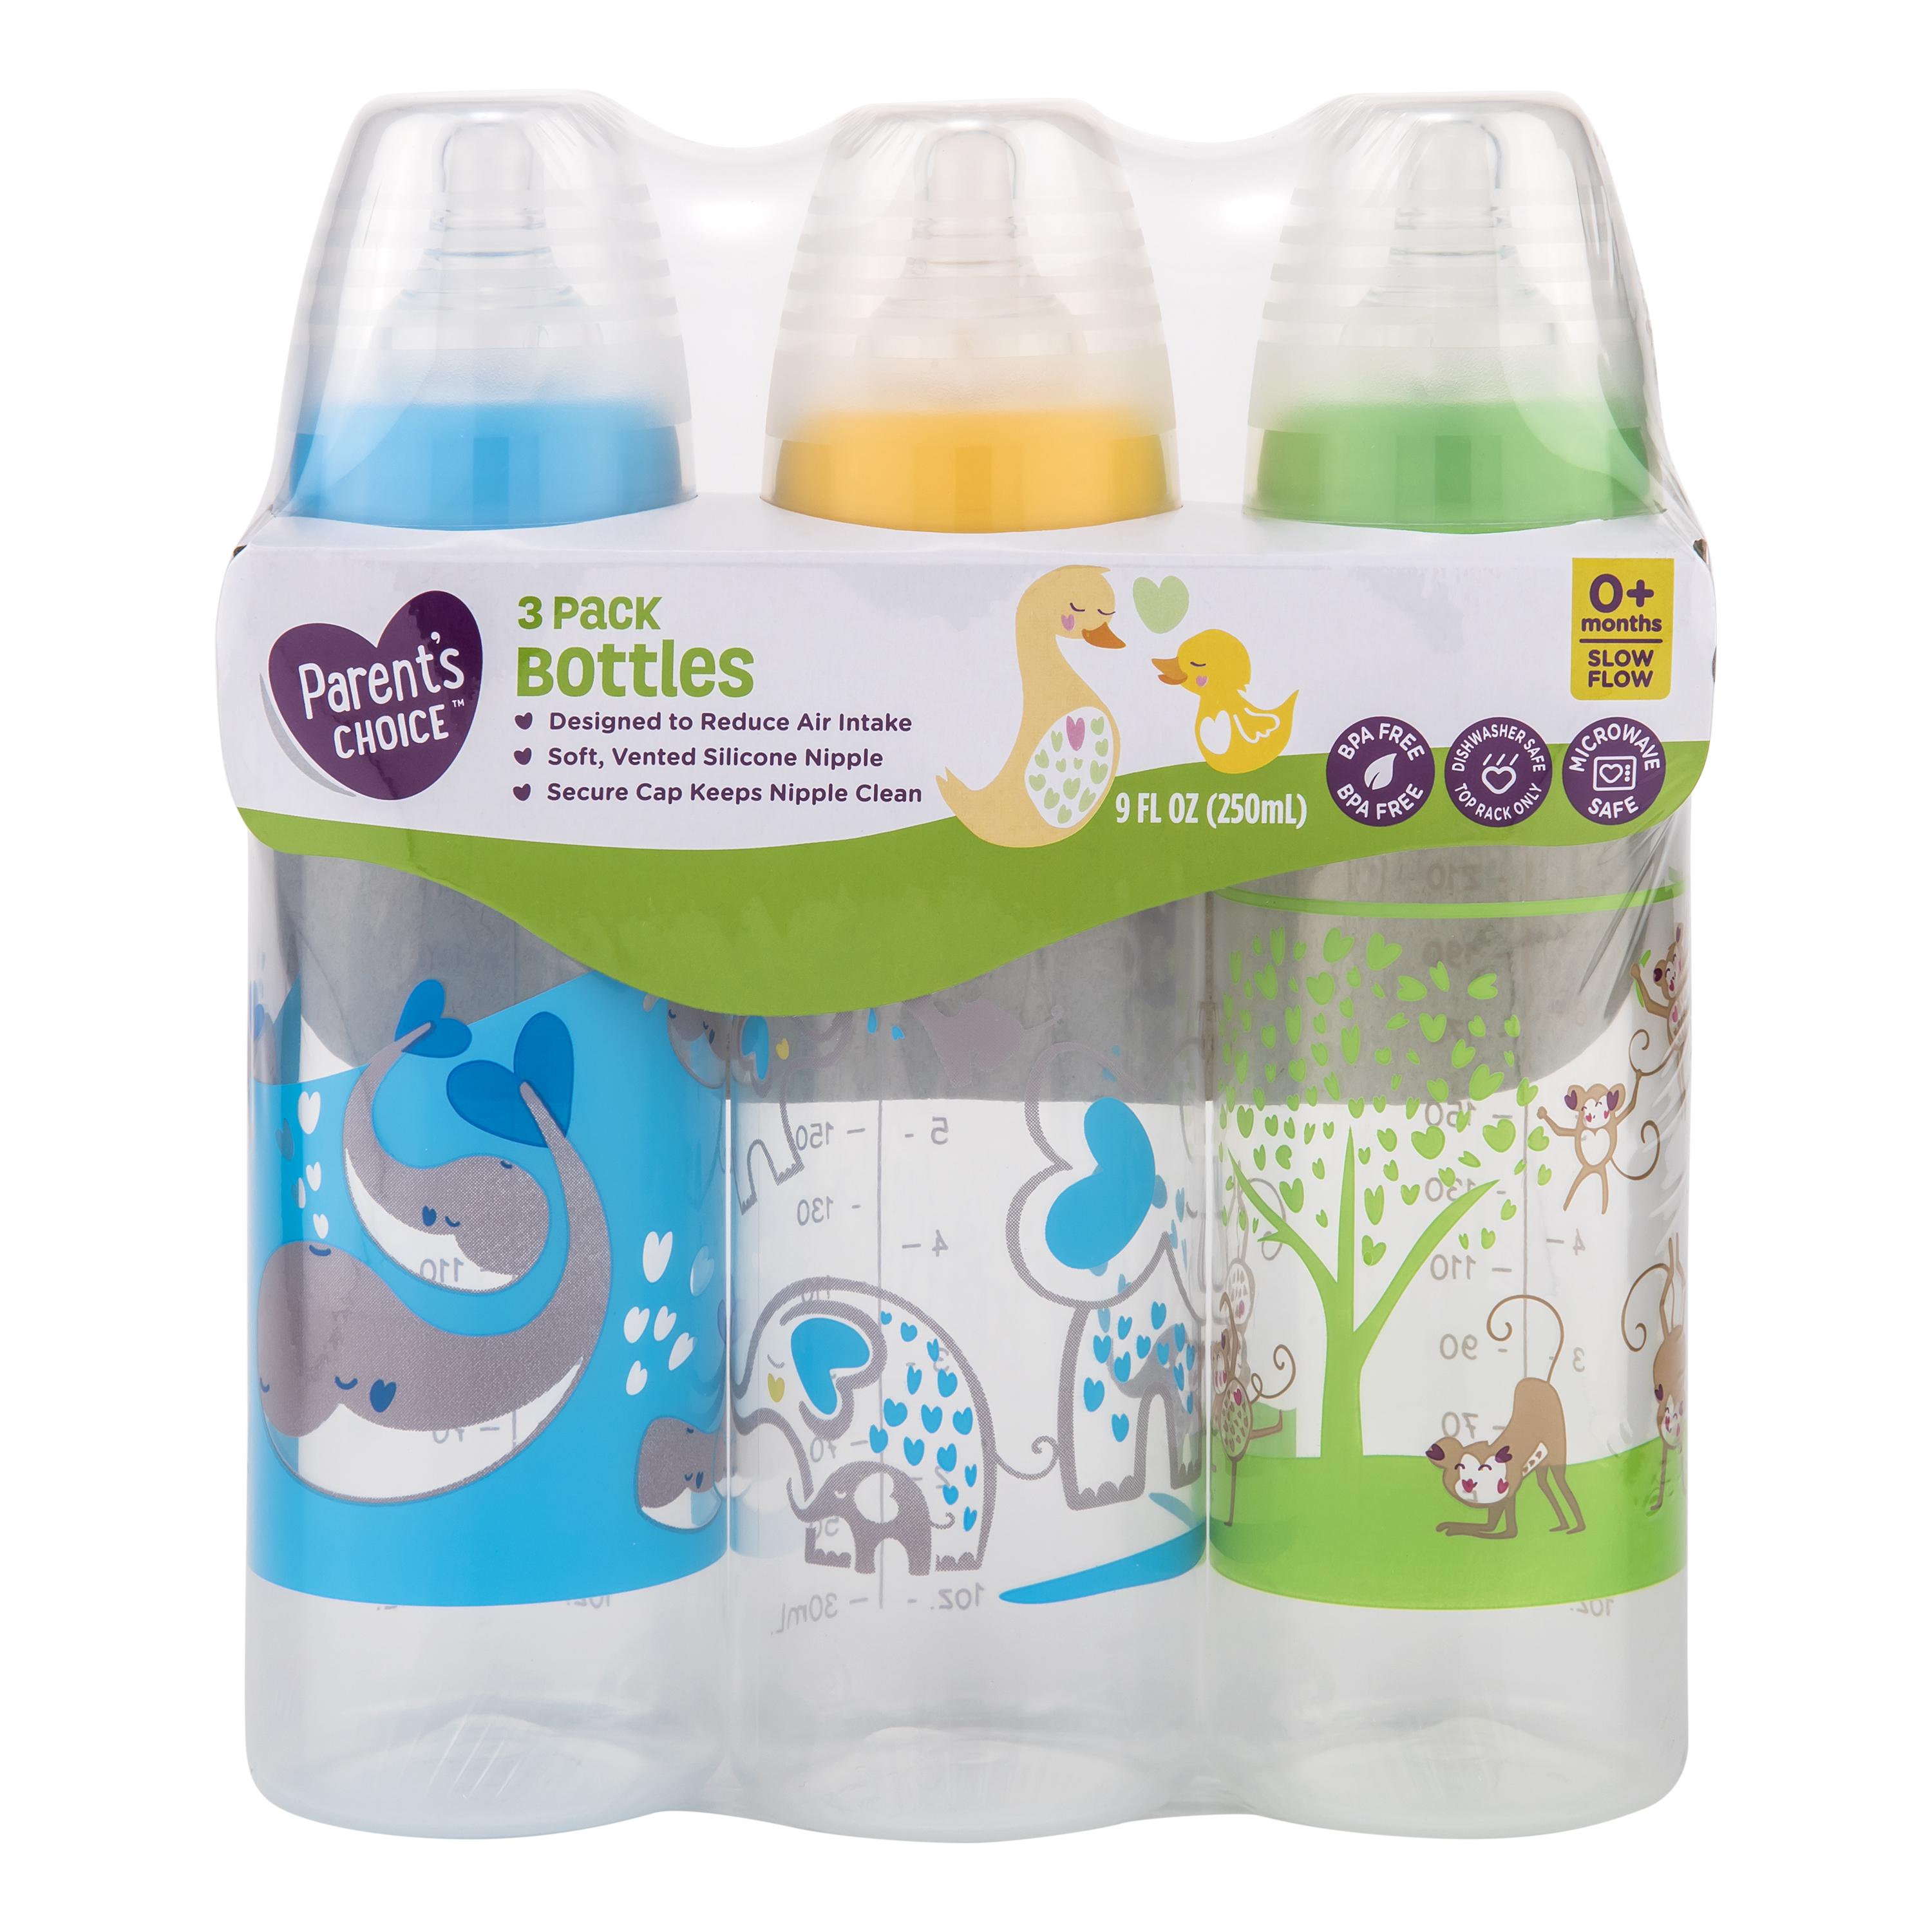 Parent's Choice Baby Bottles, 9 fl oz, 3 count, Colors May Vary - image 4 of 6